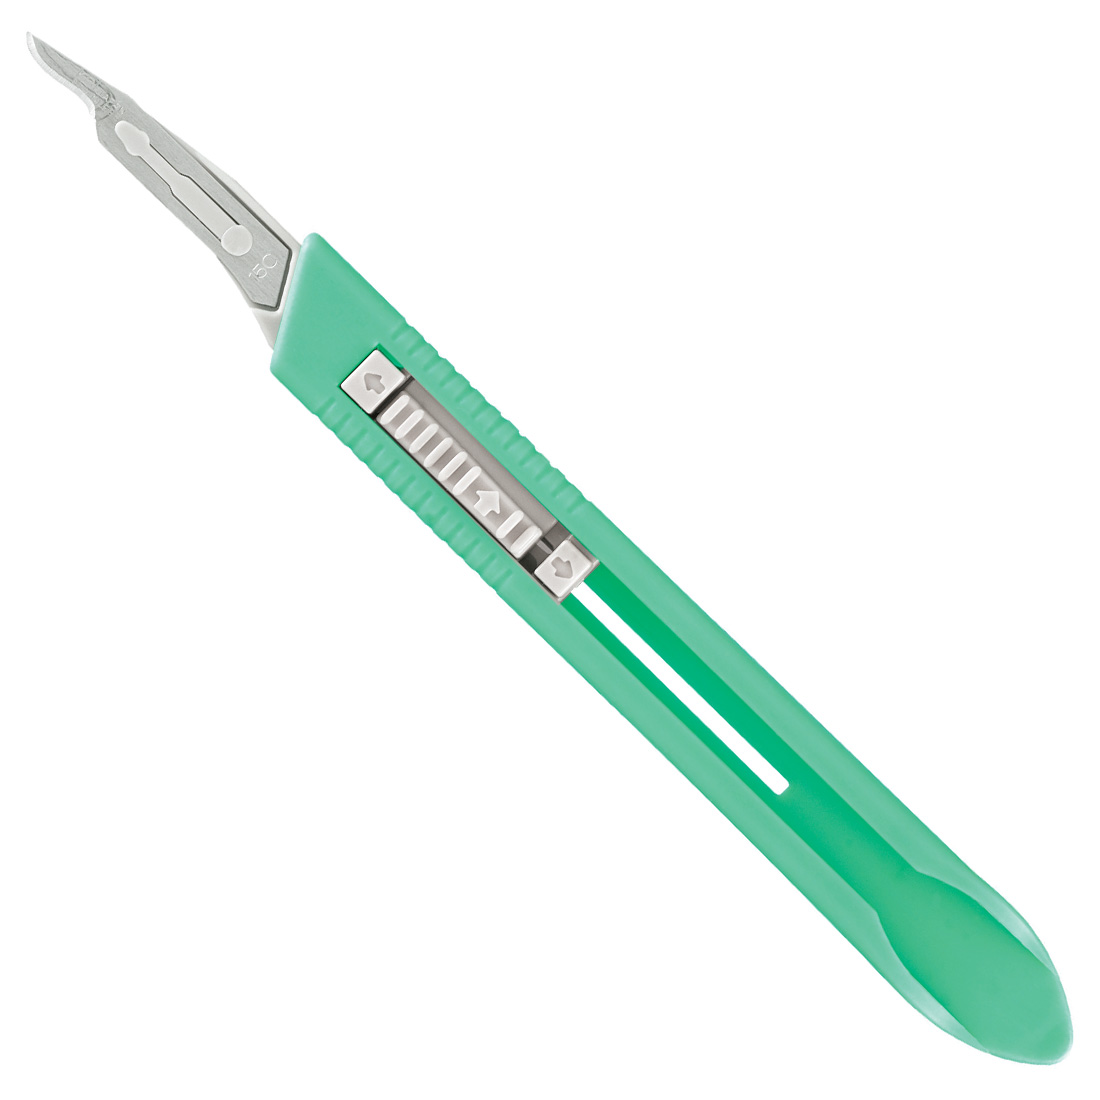 Integra® Miltex® Disposable Safety Scalpel, #15C, Stainless Steel w/Retractable Blade - 10/Box